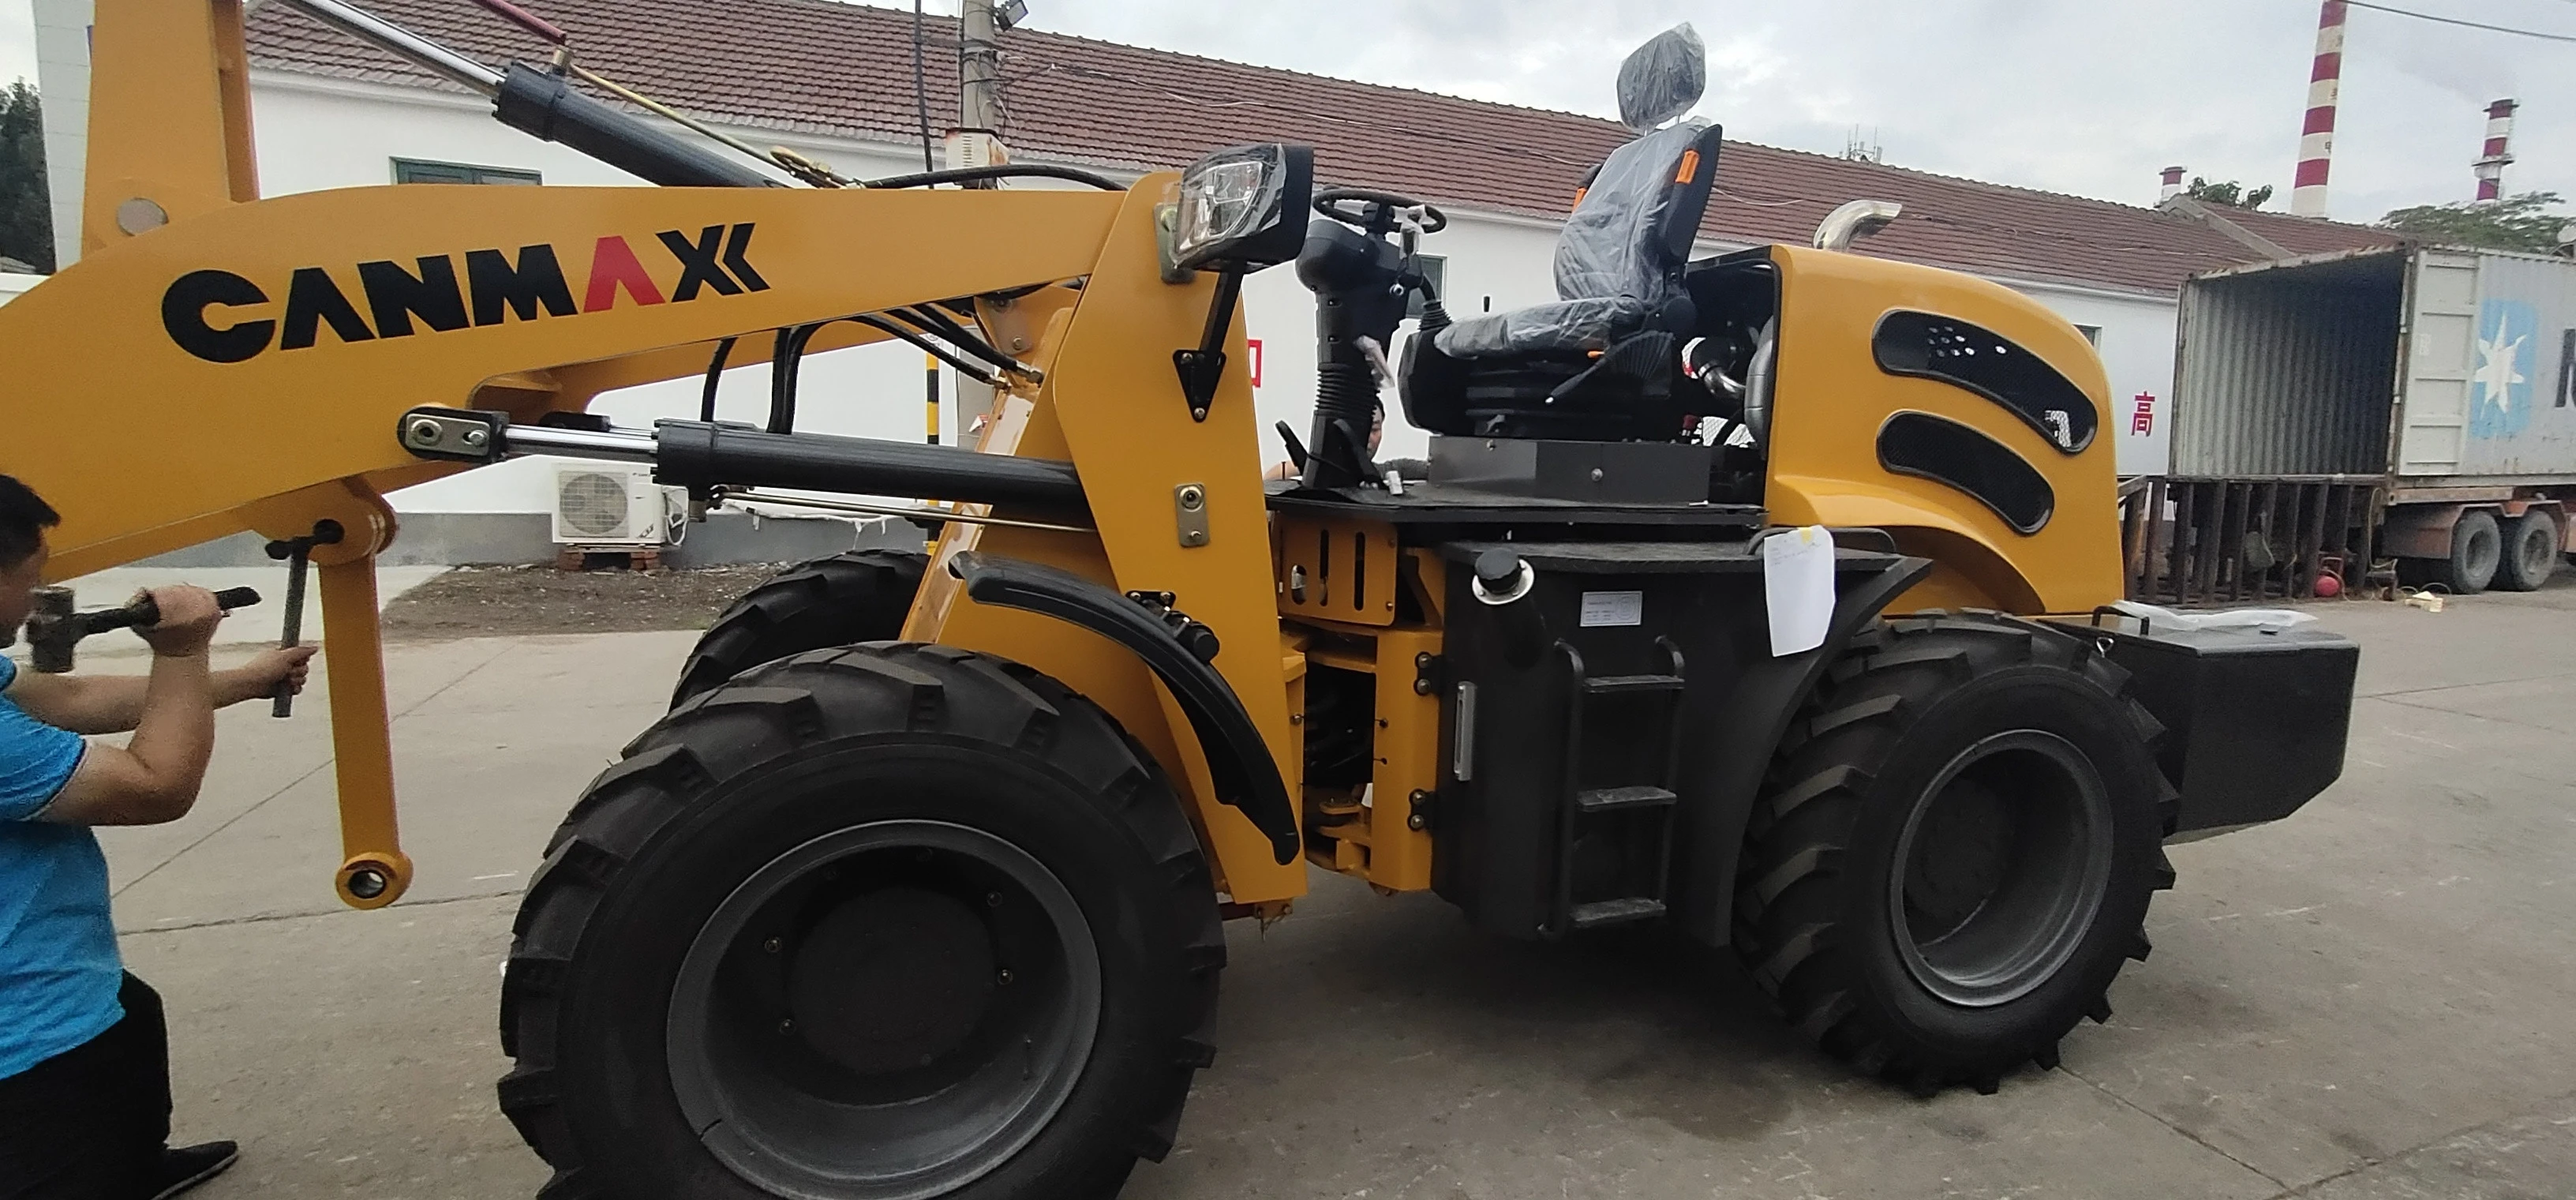 CANMAX CM809T telescopic machine wheel mini loader forklift boom loader made in China used prices for sale